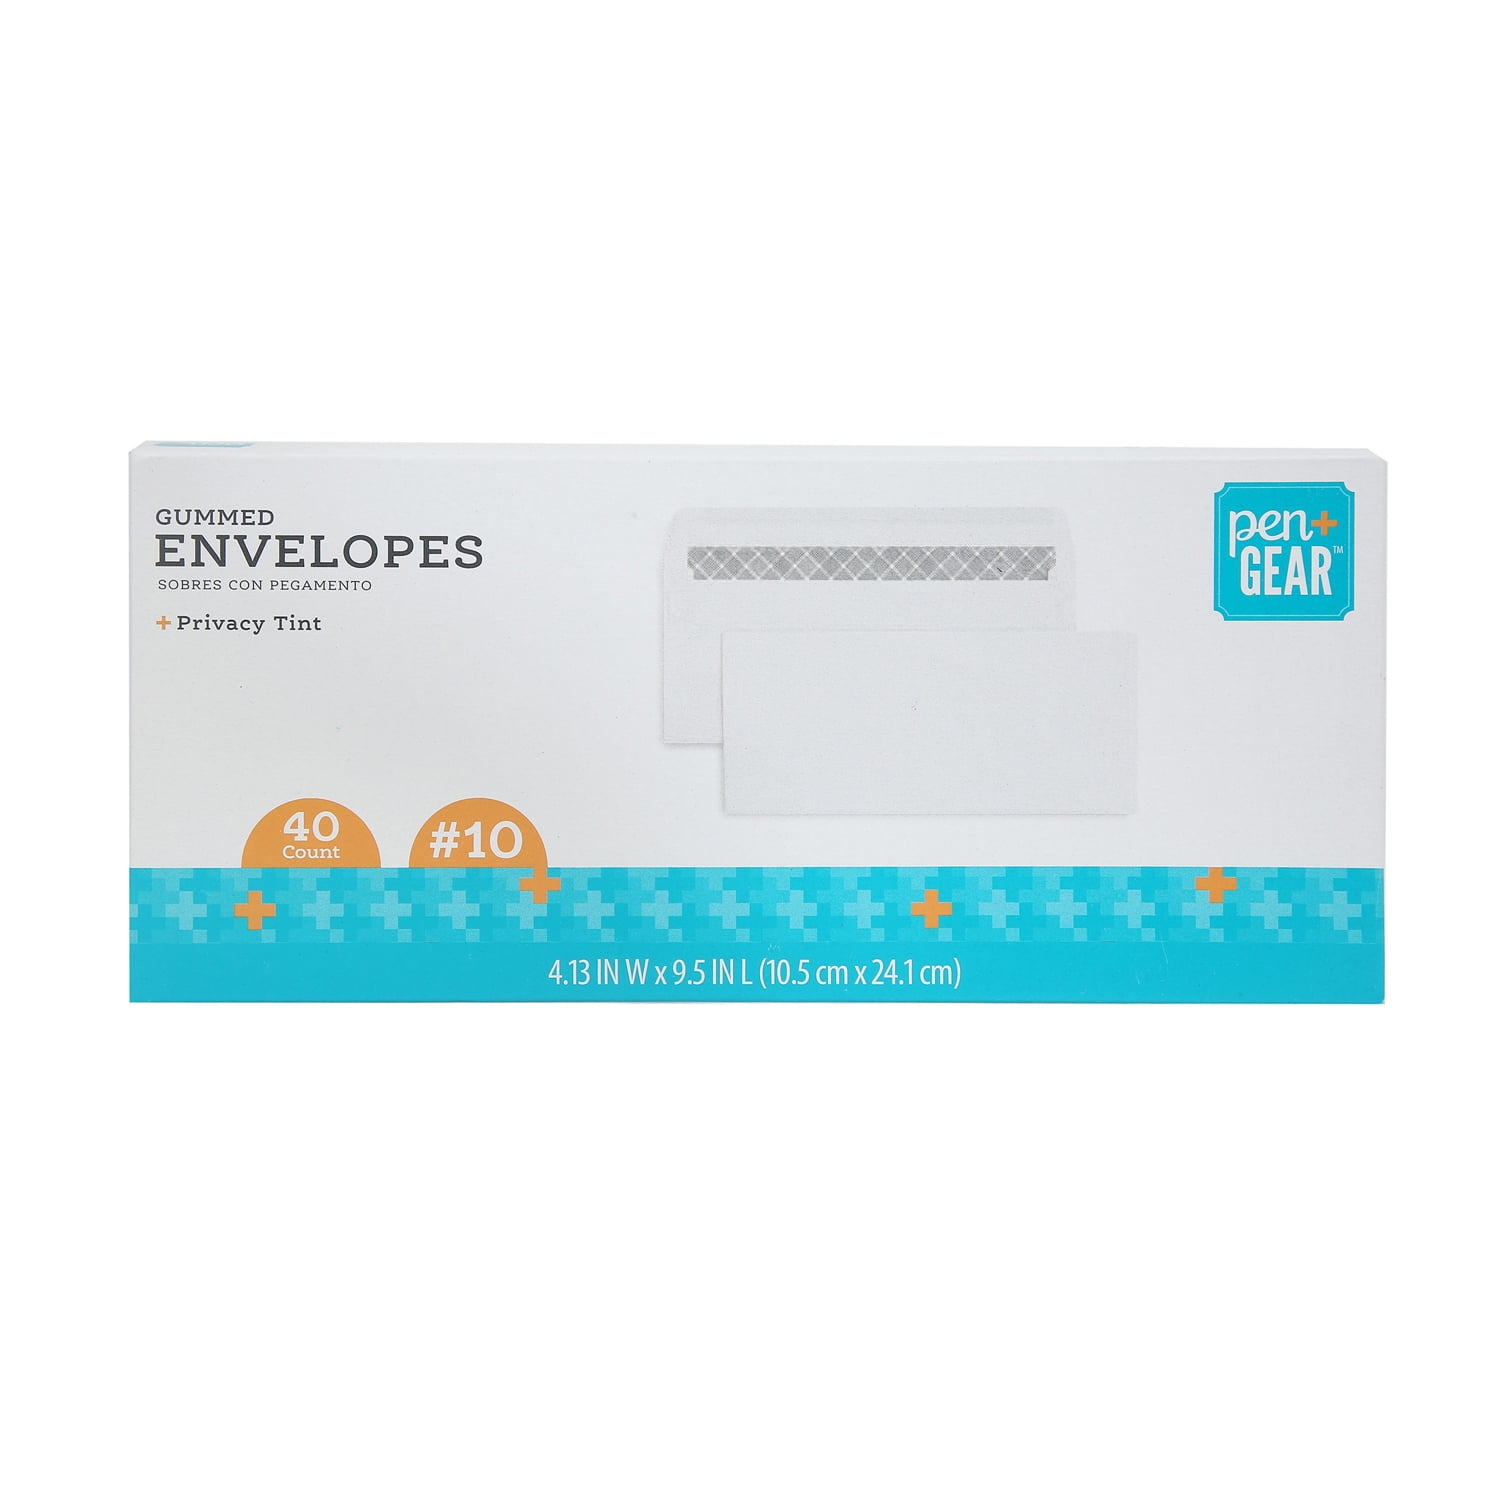 Pen + Gear #10 Privacy Tinted Gummed Envelopes, White, Count per Pack 40, Size - 4.13"x9.5"